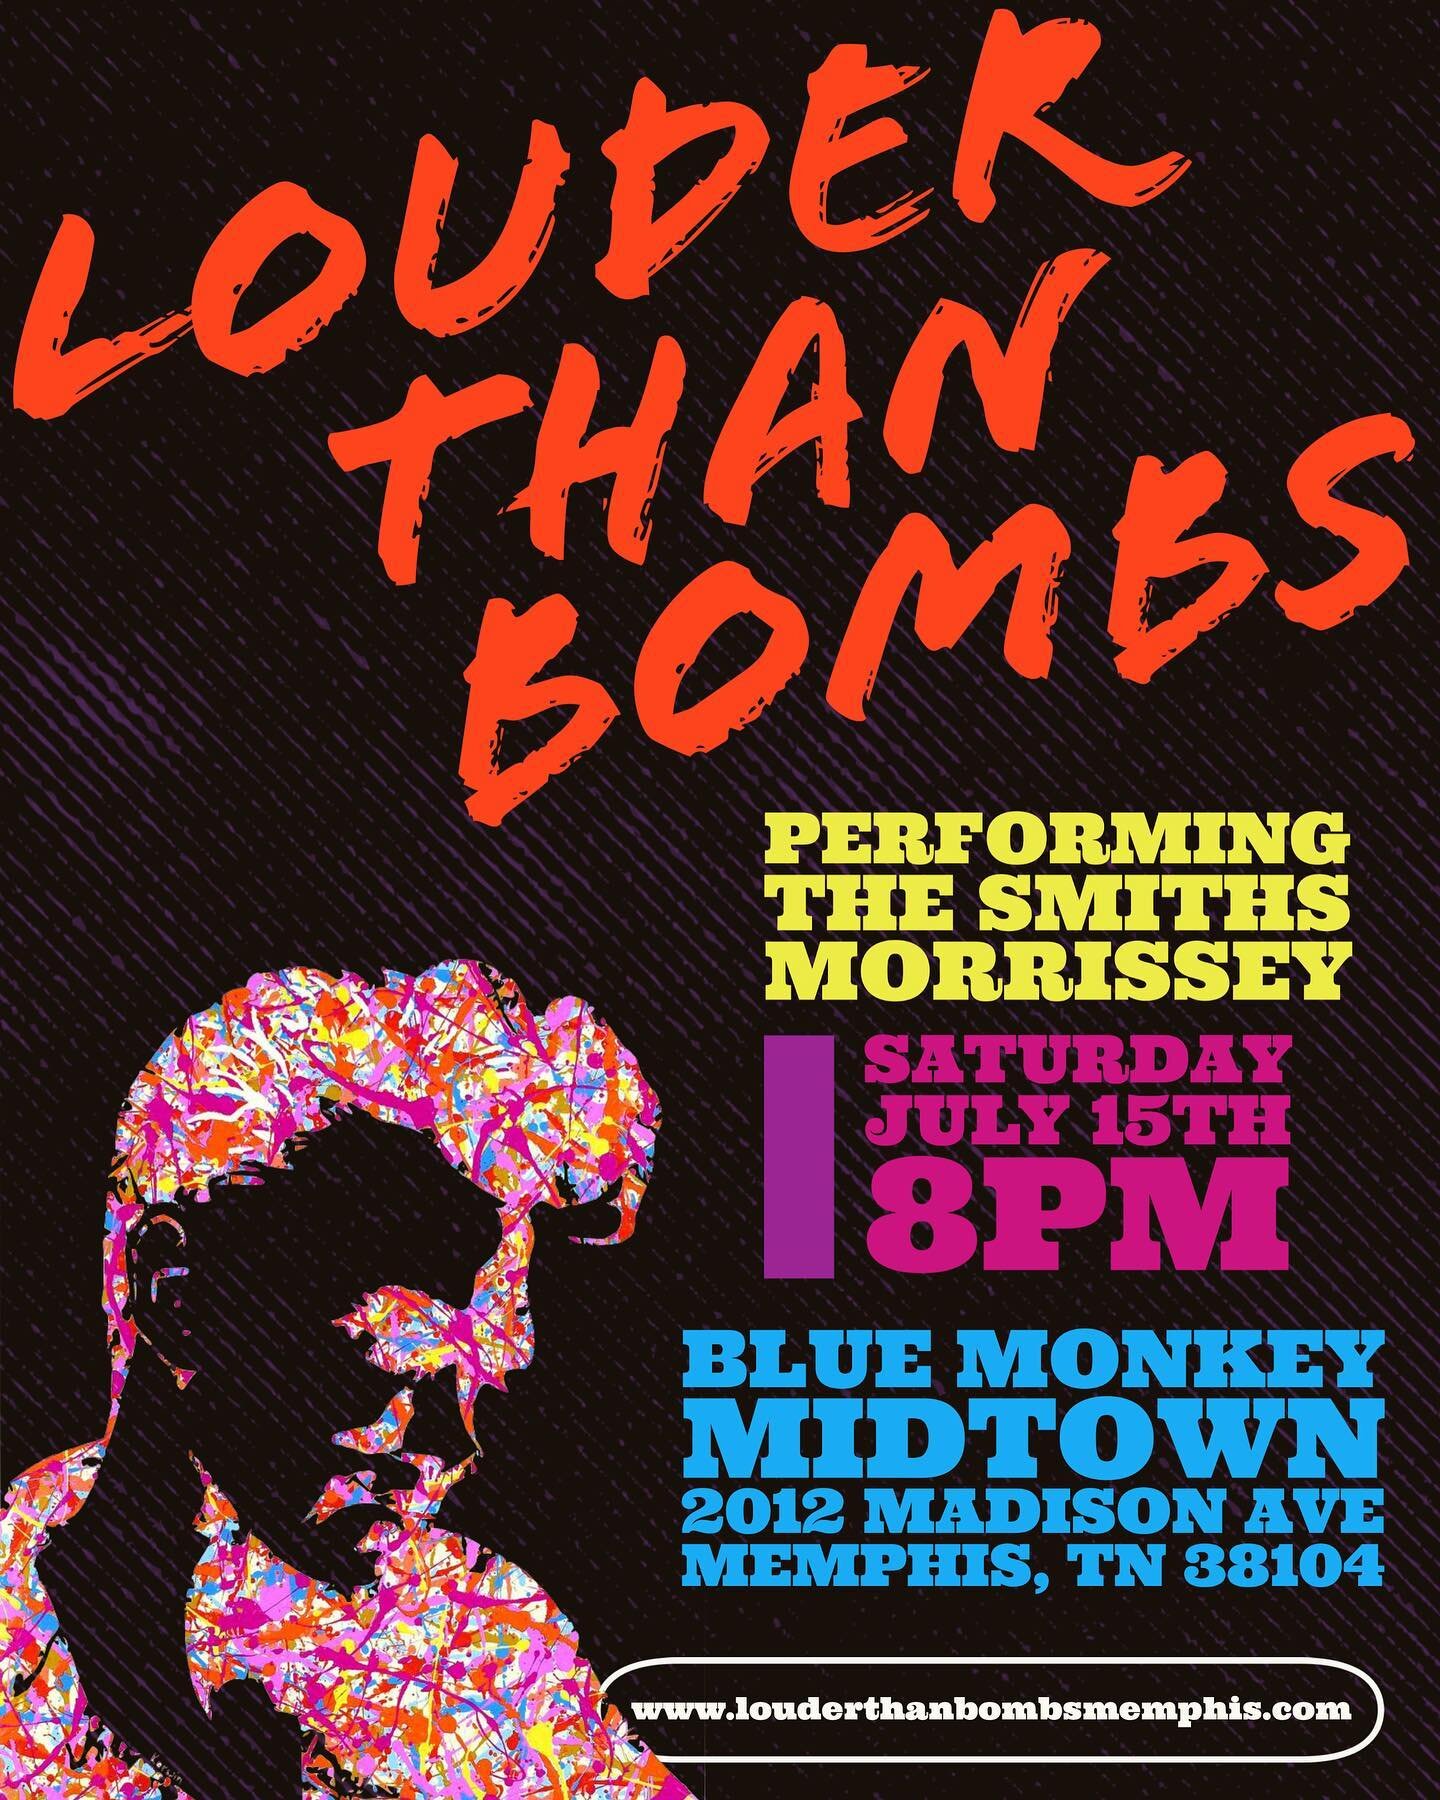 EARLY SHOW @ 8PM! Louder Than Bombs returns to perform The Smiths and Morrissey at Blue Monkey Midtown&hellip; #thesmiths #morrissey